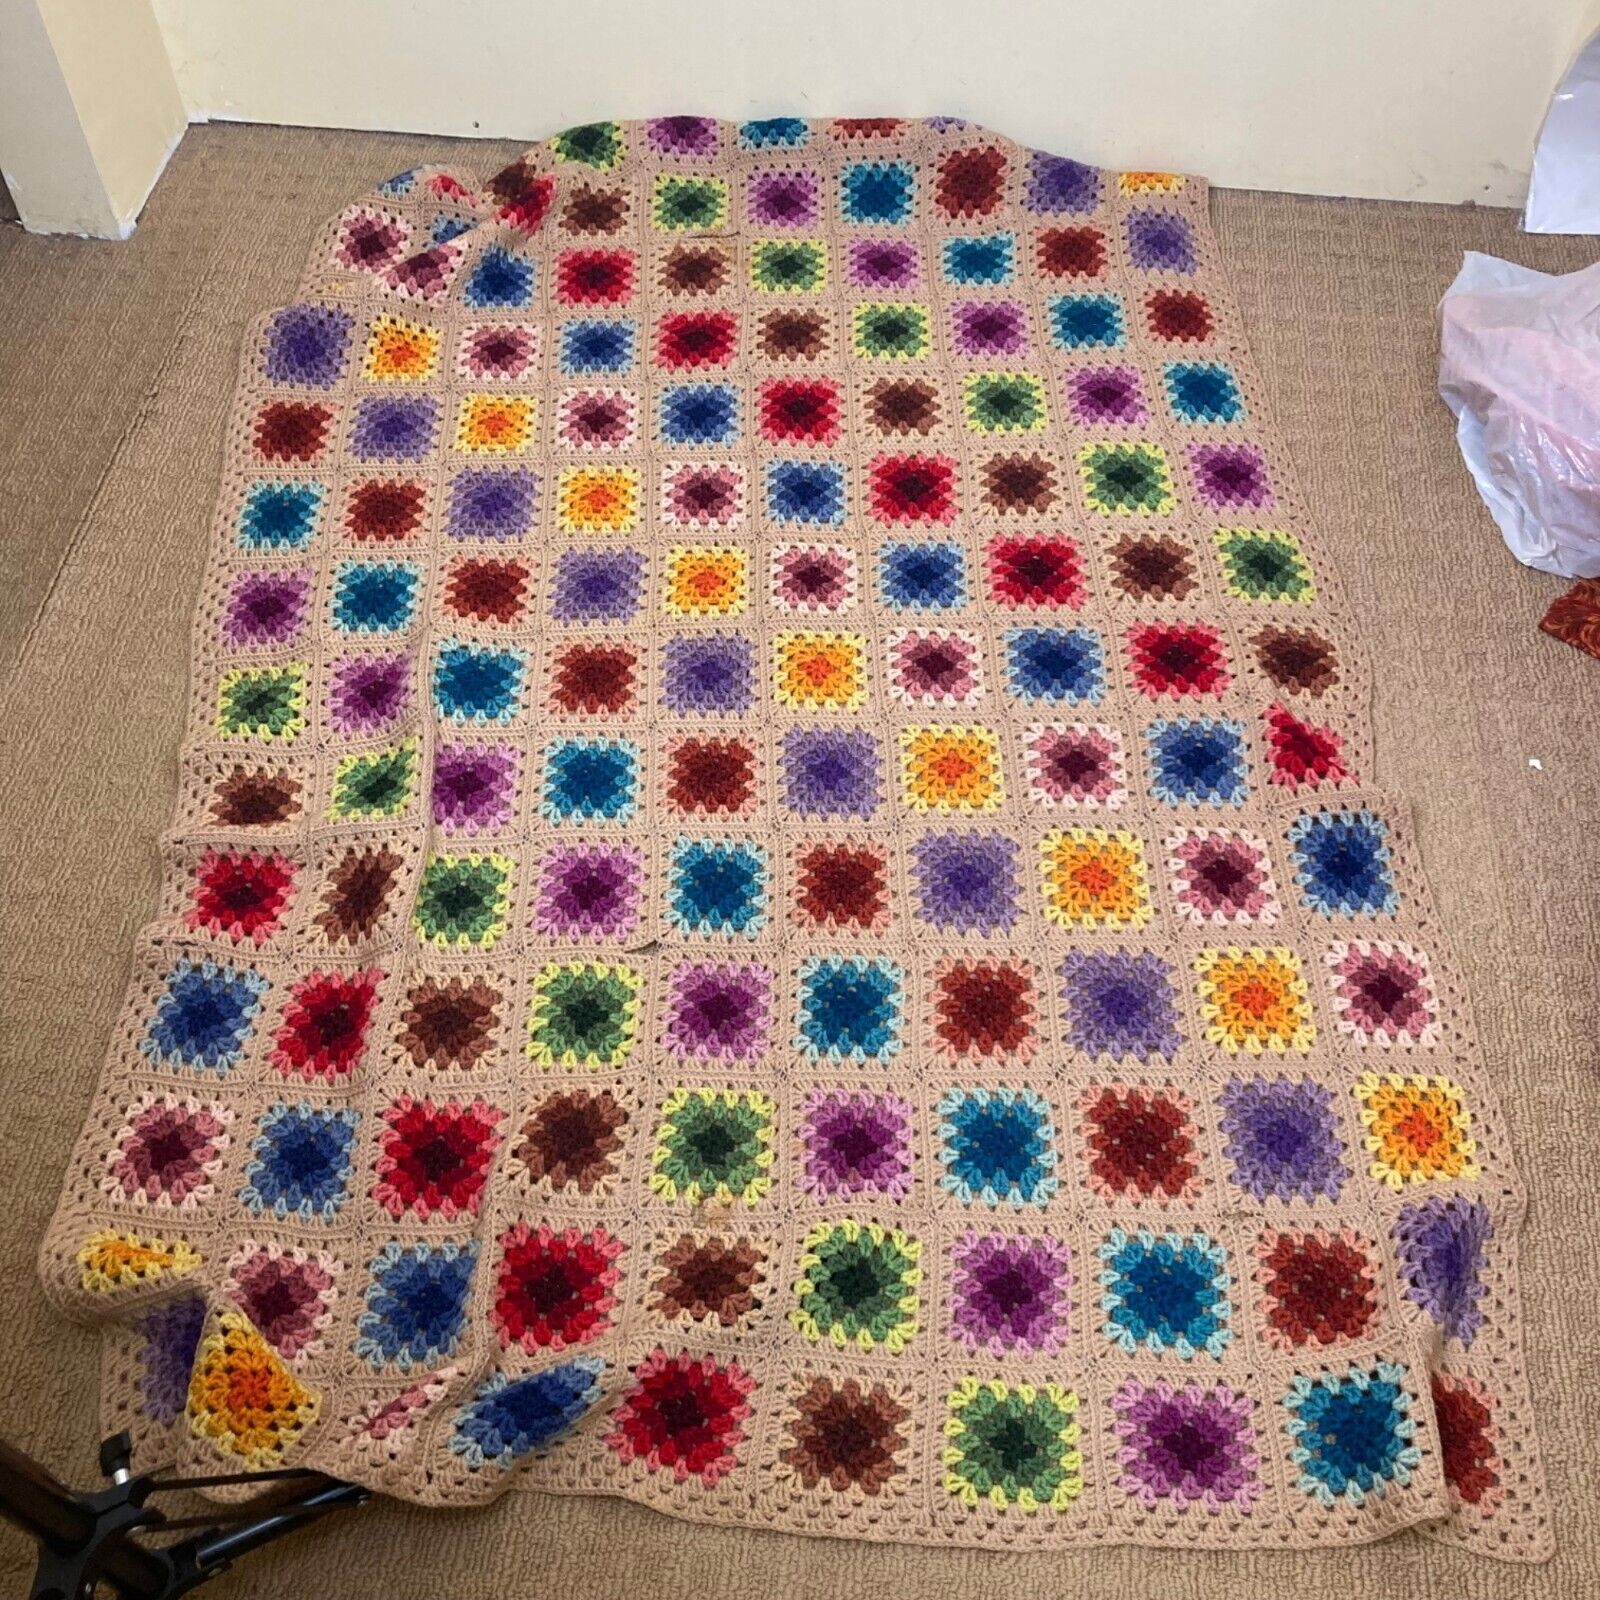 Granny Square Blanket Vintage 67 x 44 Inches Artisan Multi Colored FLAWED as is